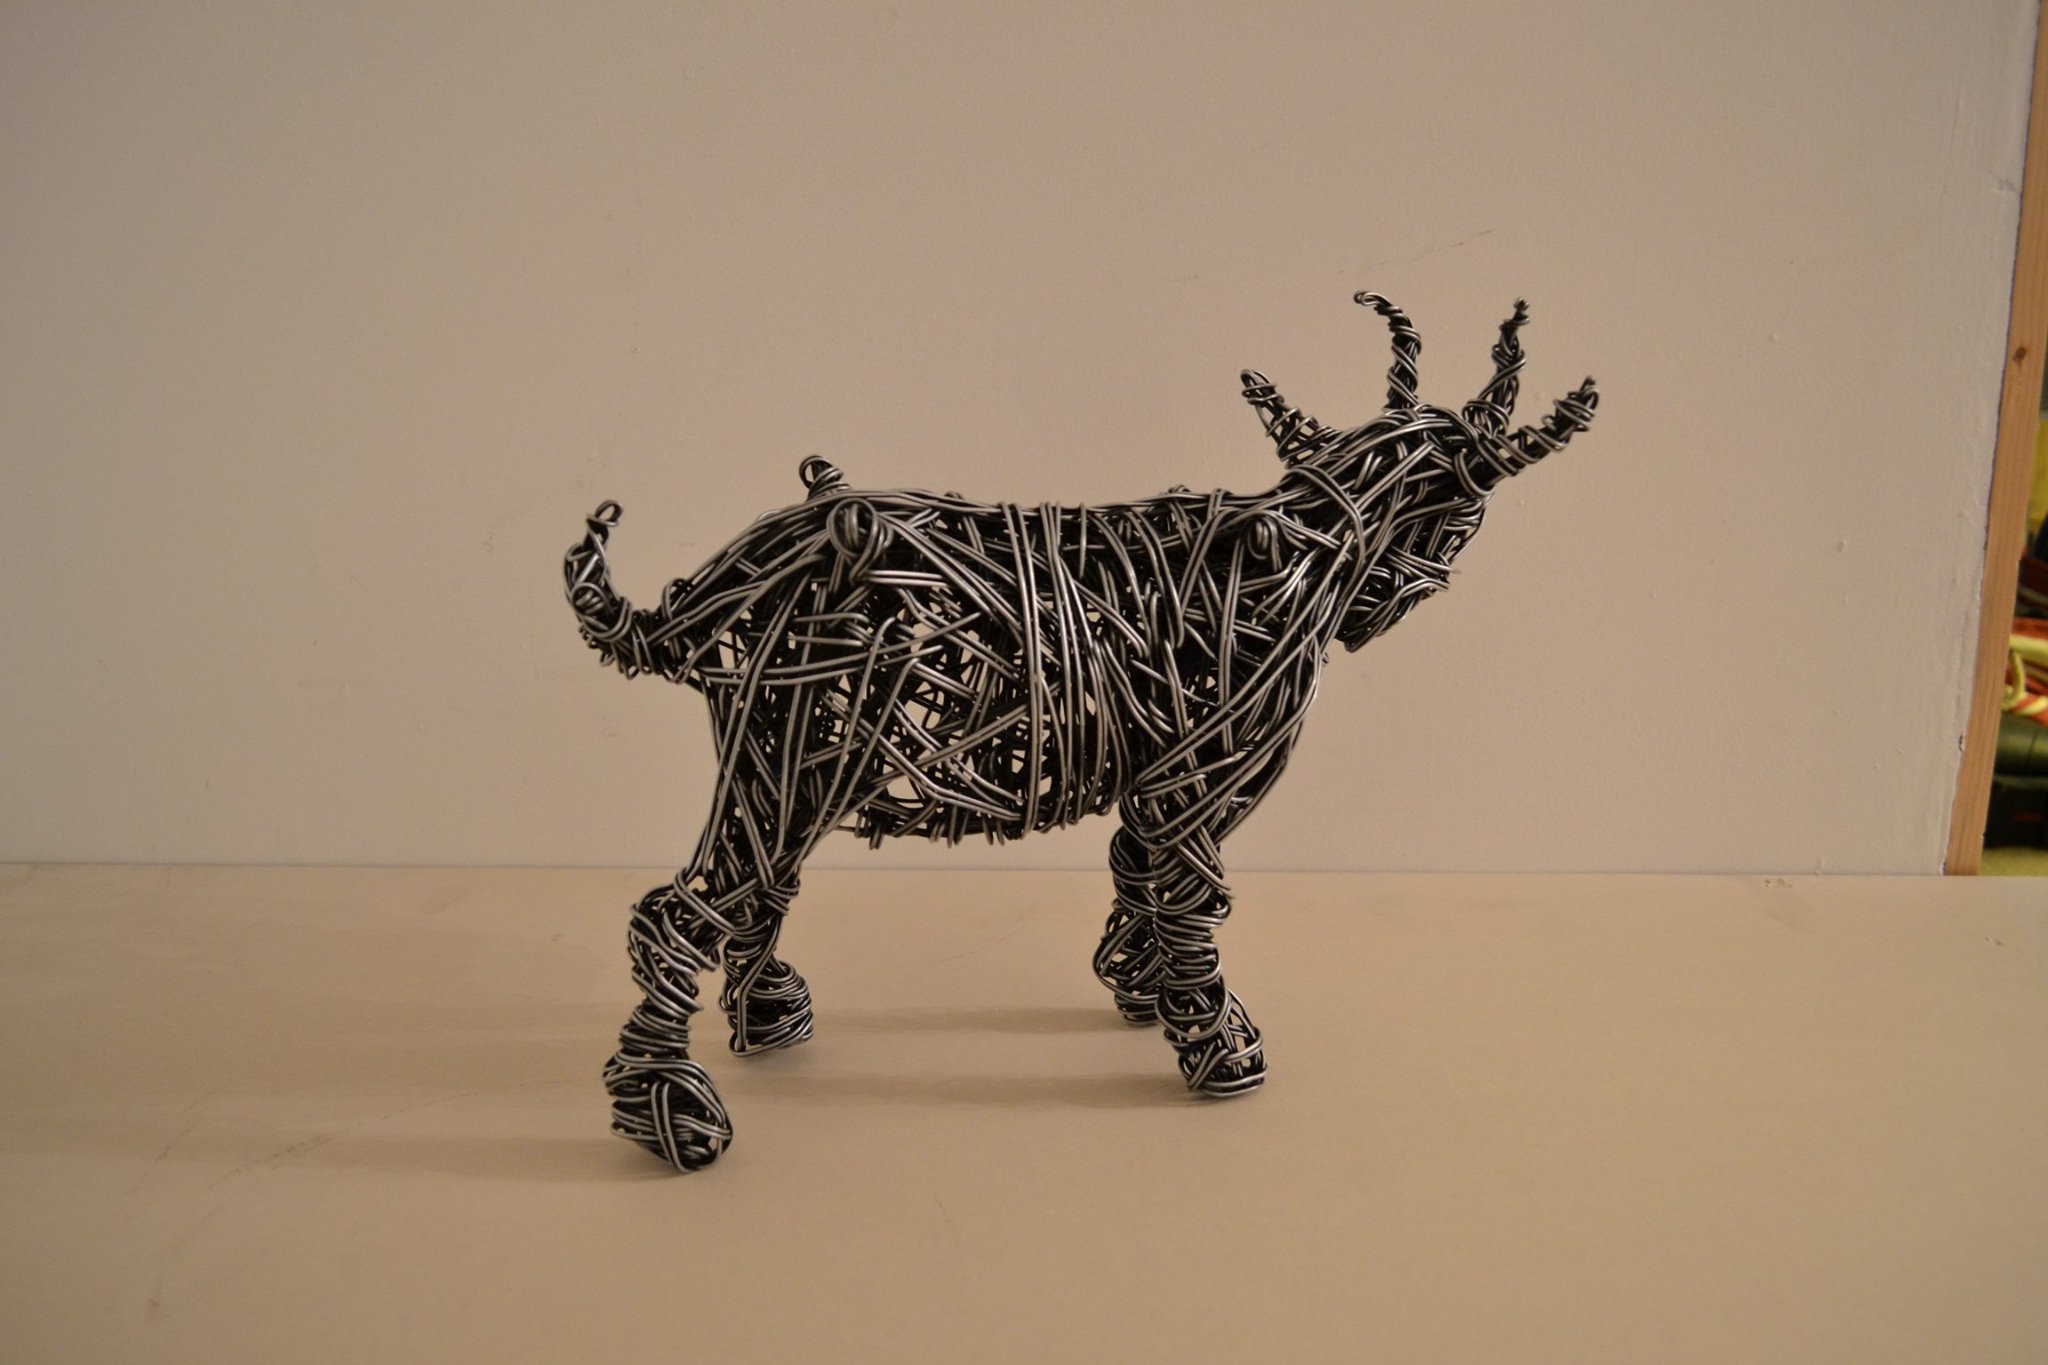 Wire Art - Bonsai Tree Sculptures by Jim Beghtol - Asheville Art Gallery, Contemporary Mountain Crafts